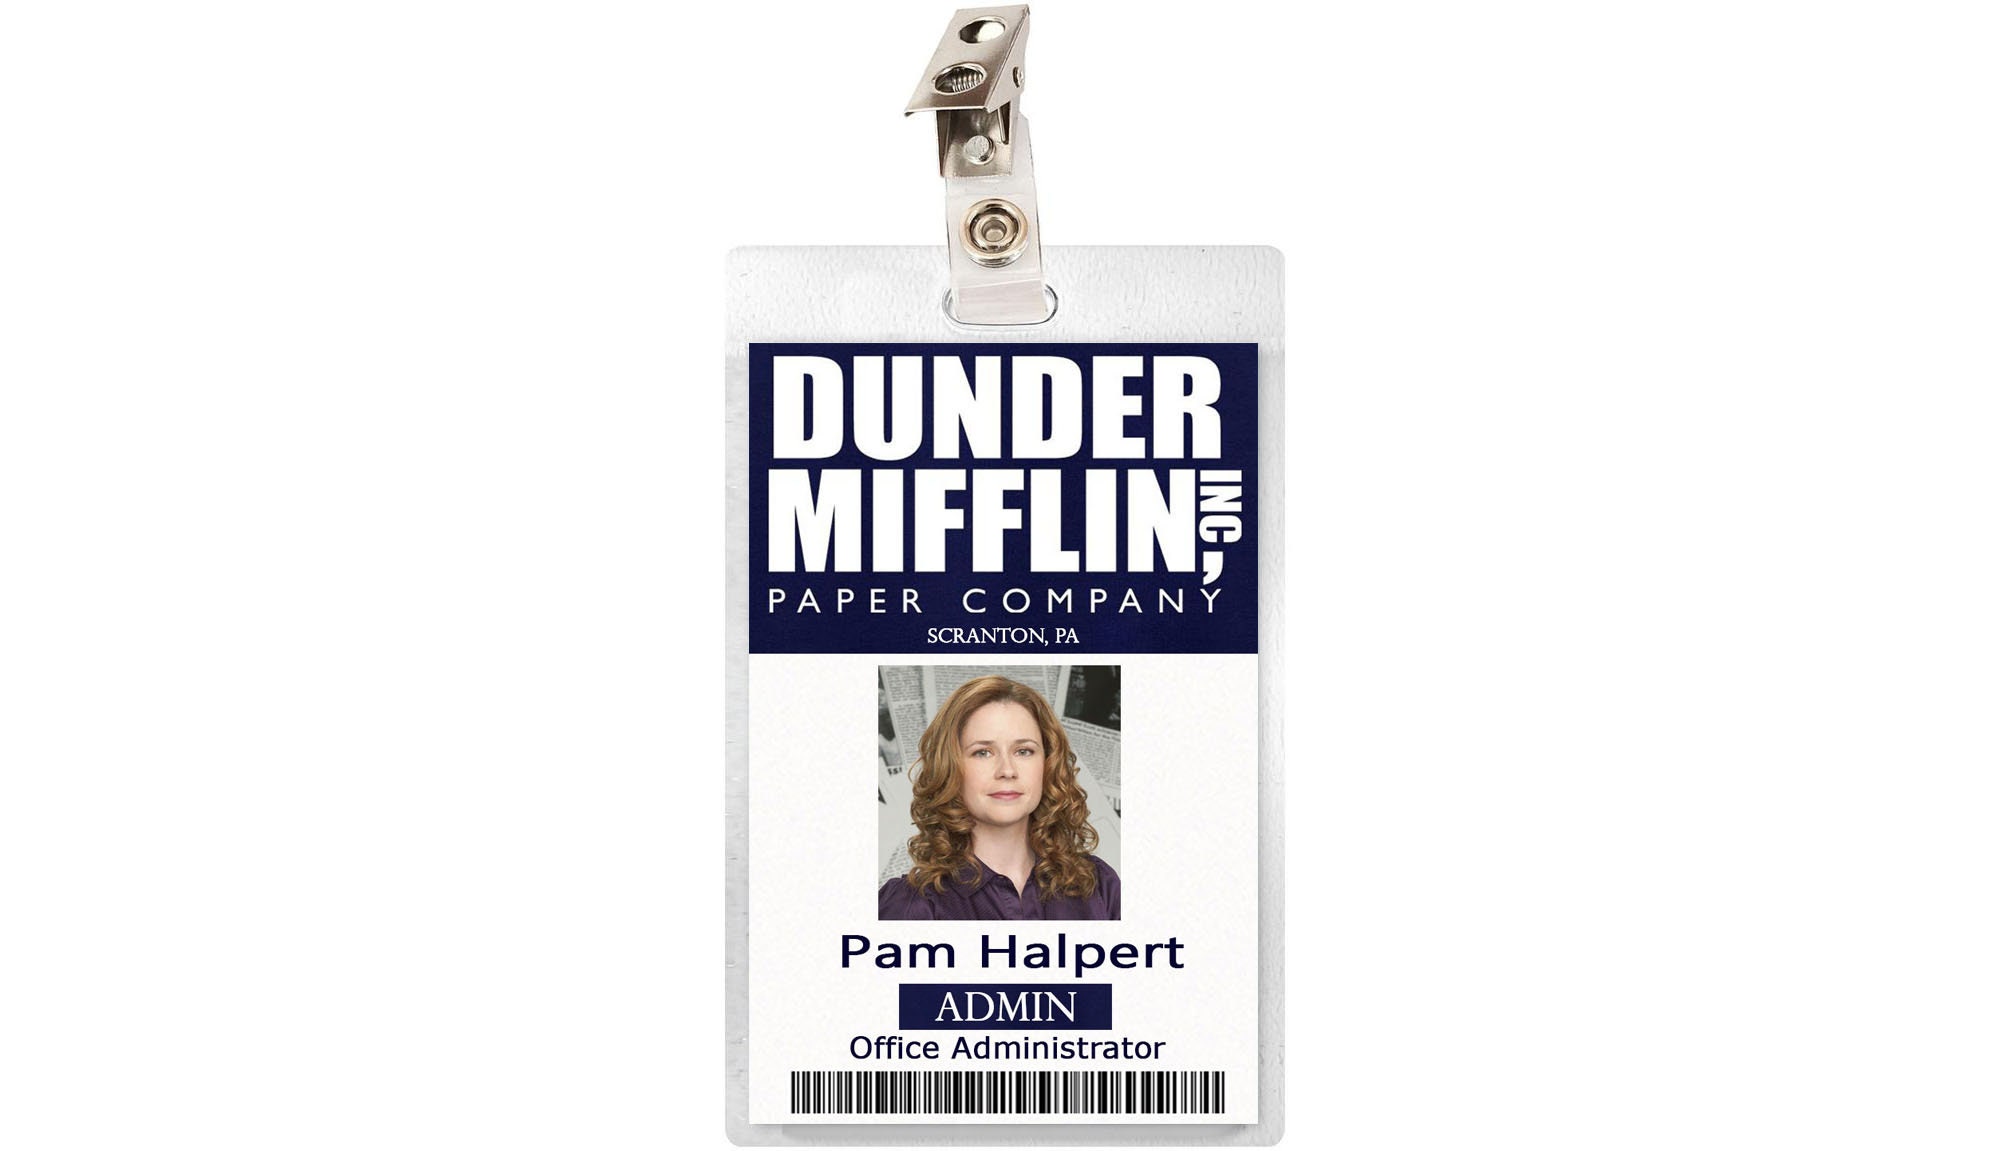 Every Dunder Mifflin, this is Pam in 2 minutes, from The Office 